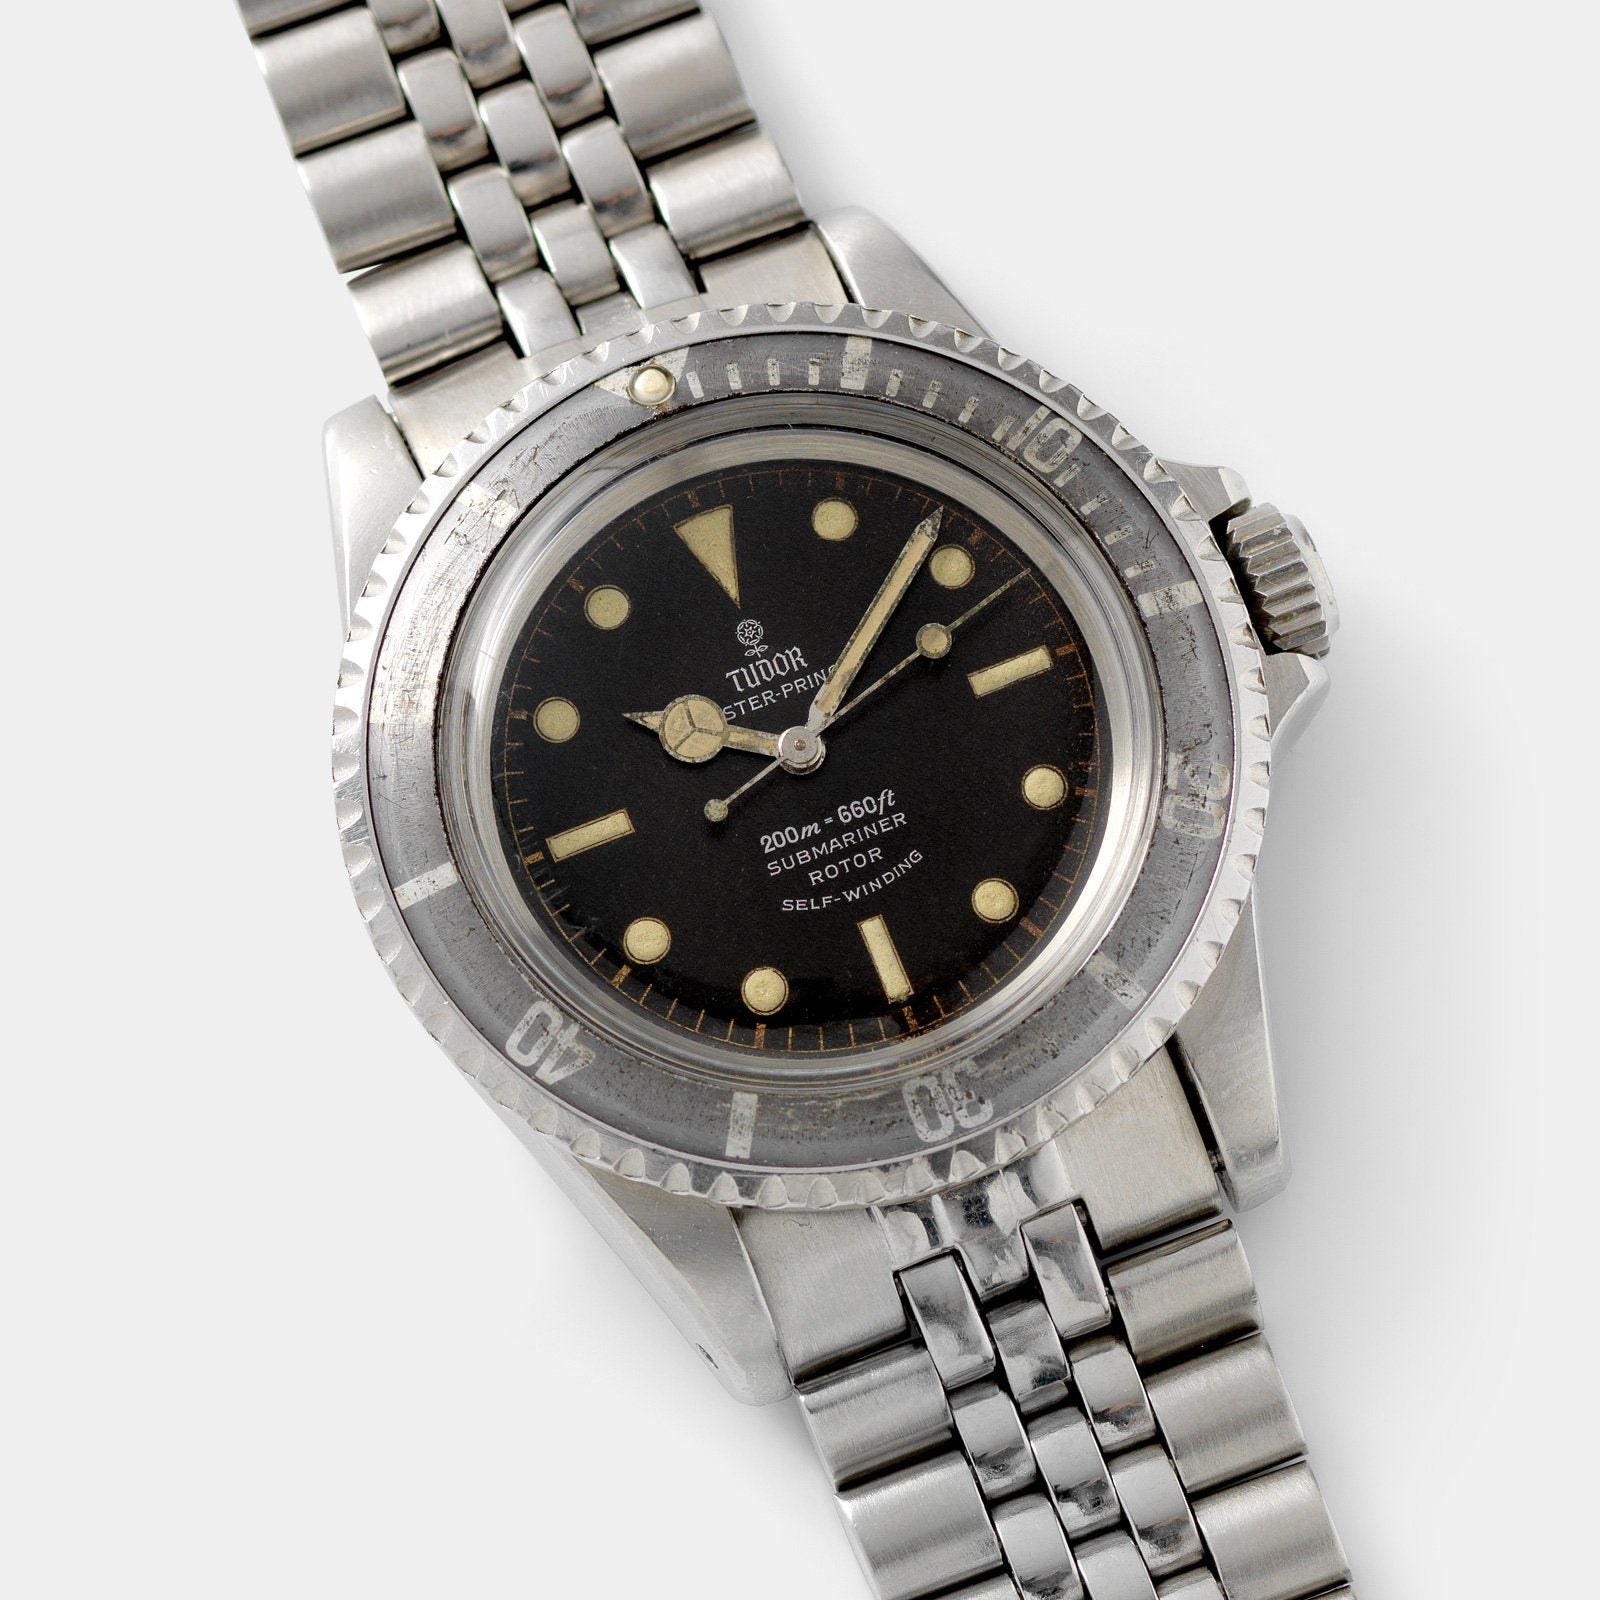 Tudor Submariner Ref 7928 Gilt Minute Track Faded Bezel with cool gilt chapter ring